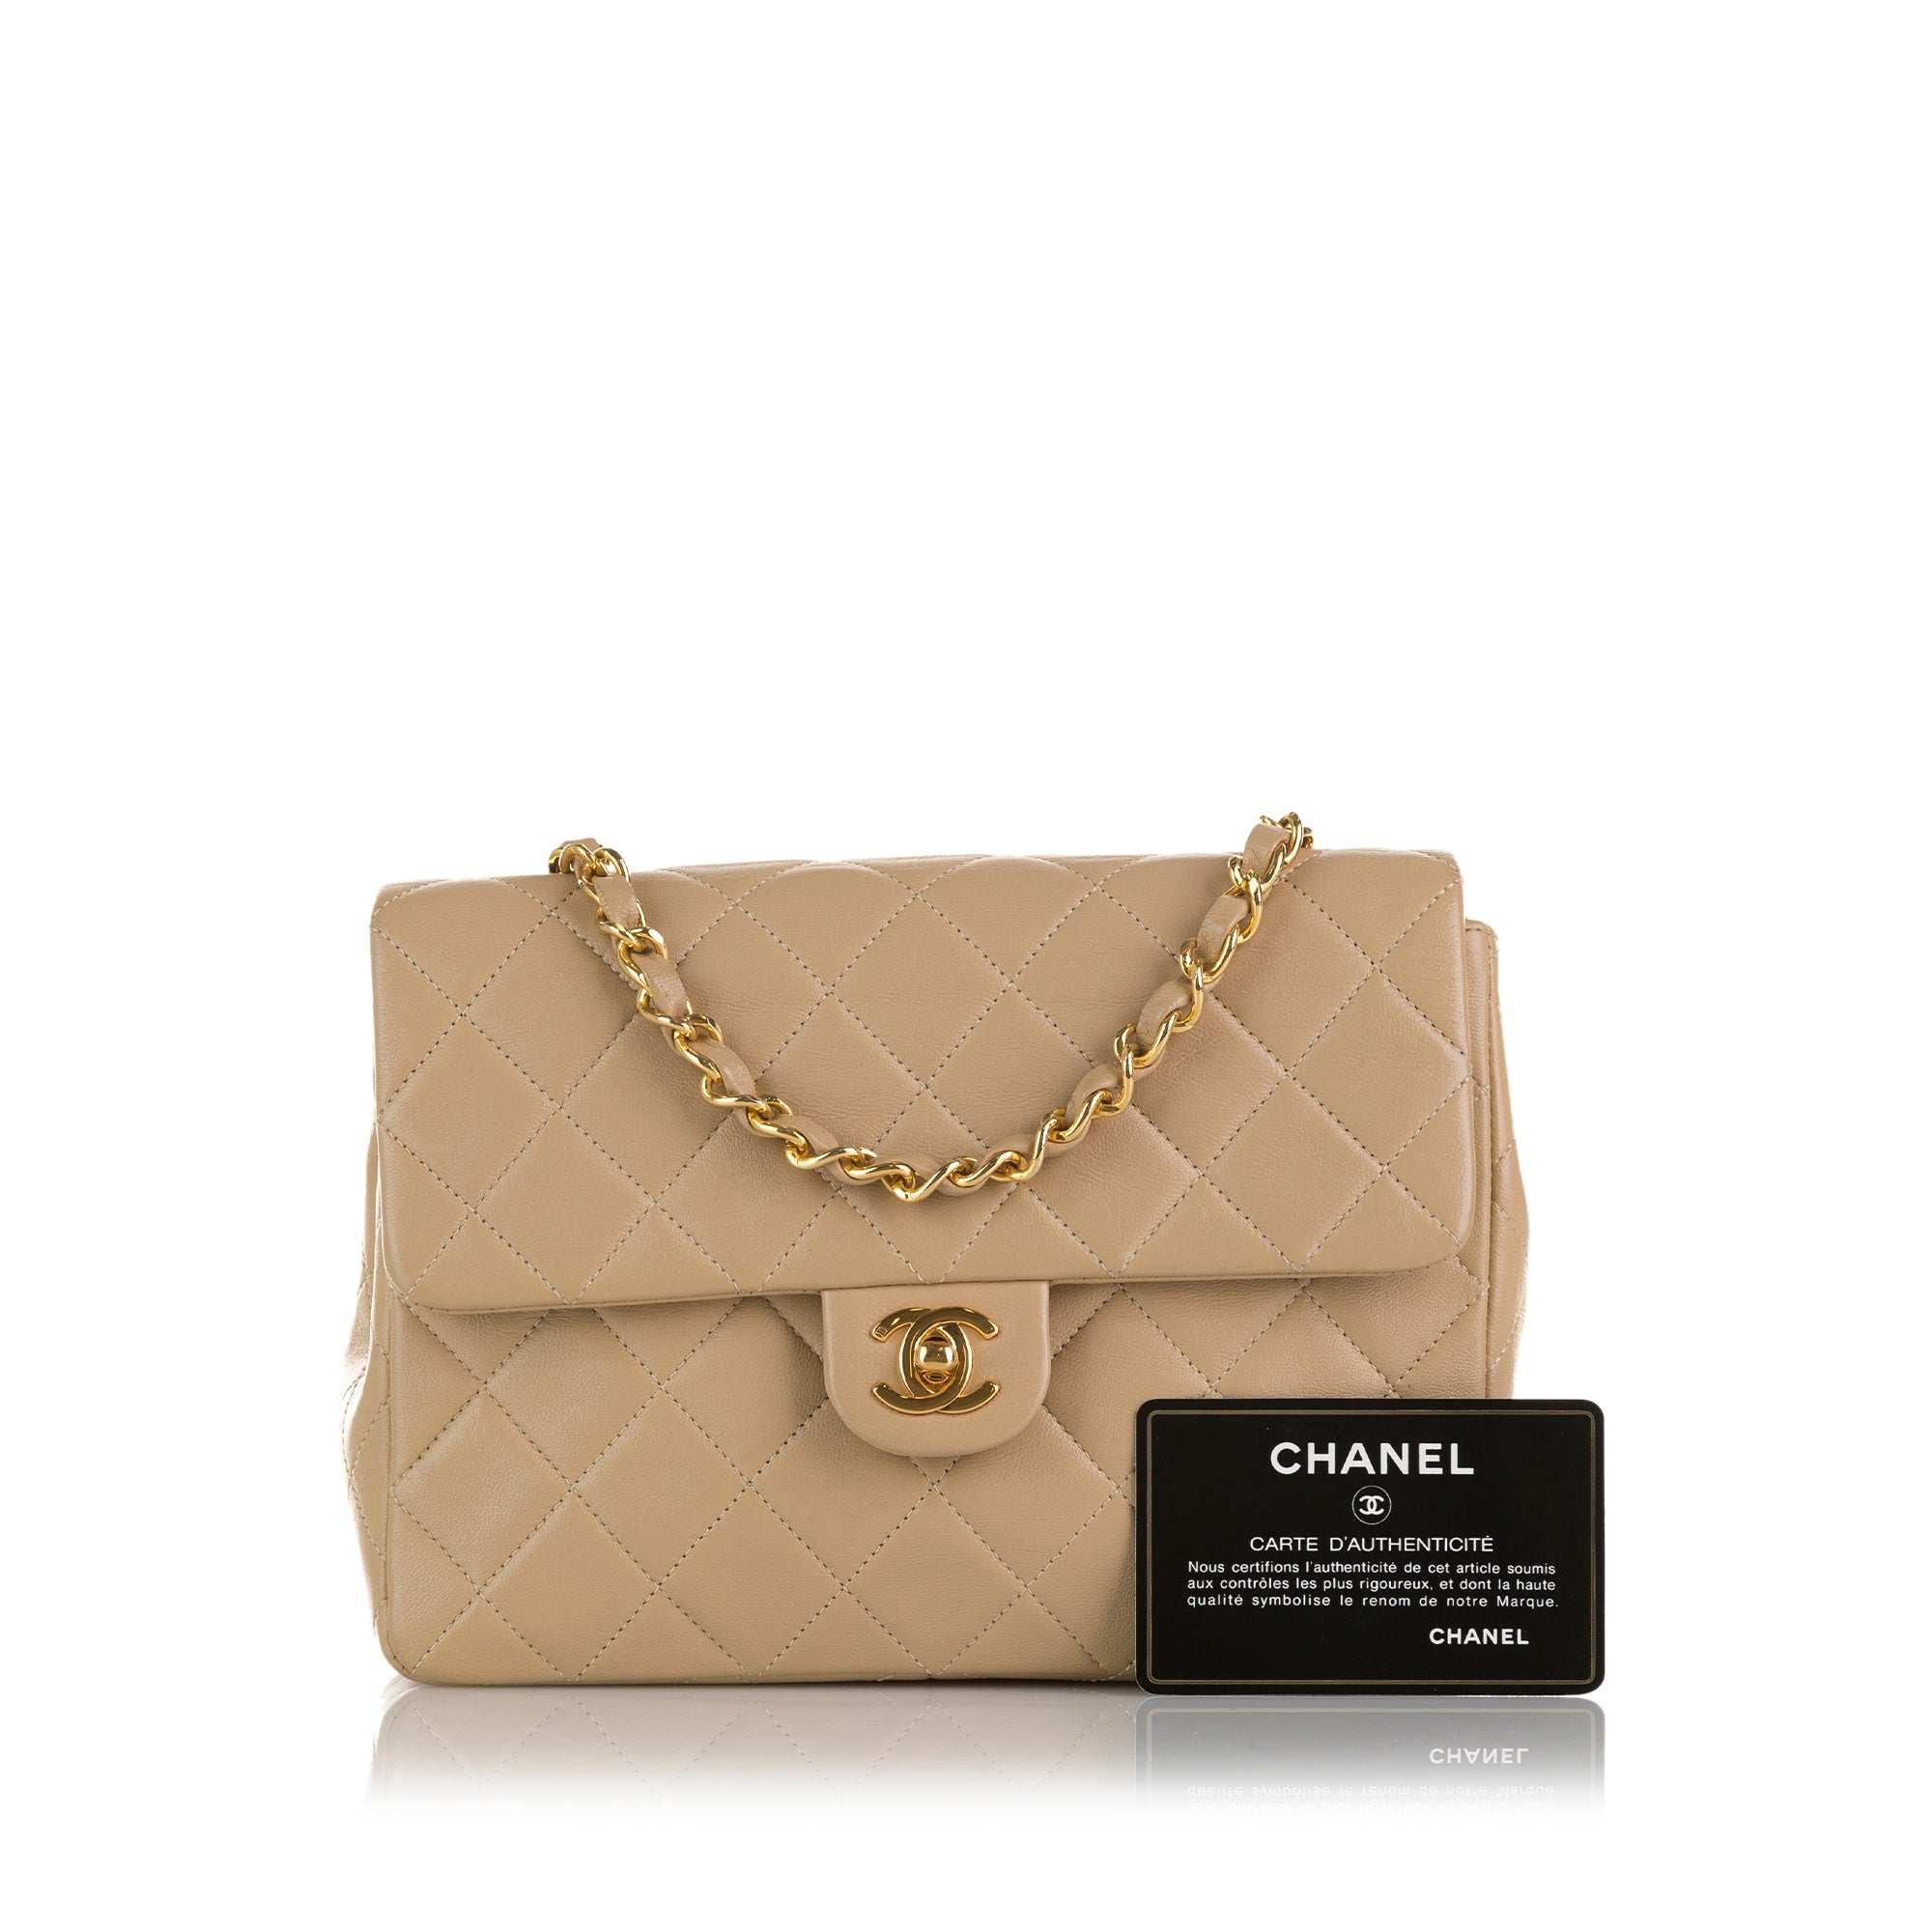 Please authenticate this vintage Chanel!